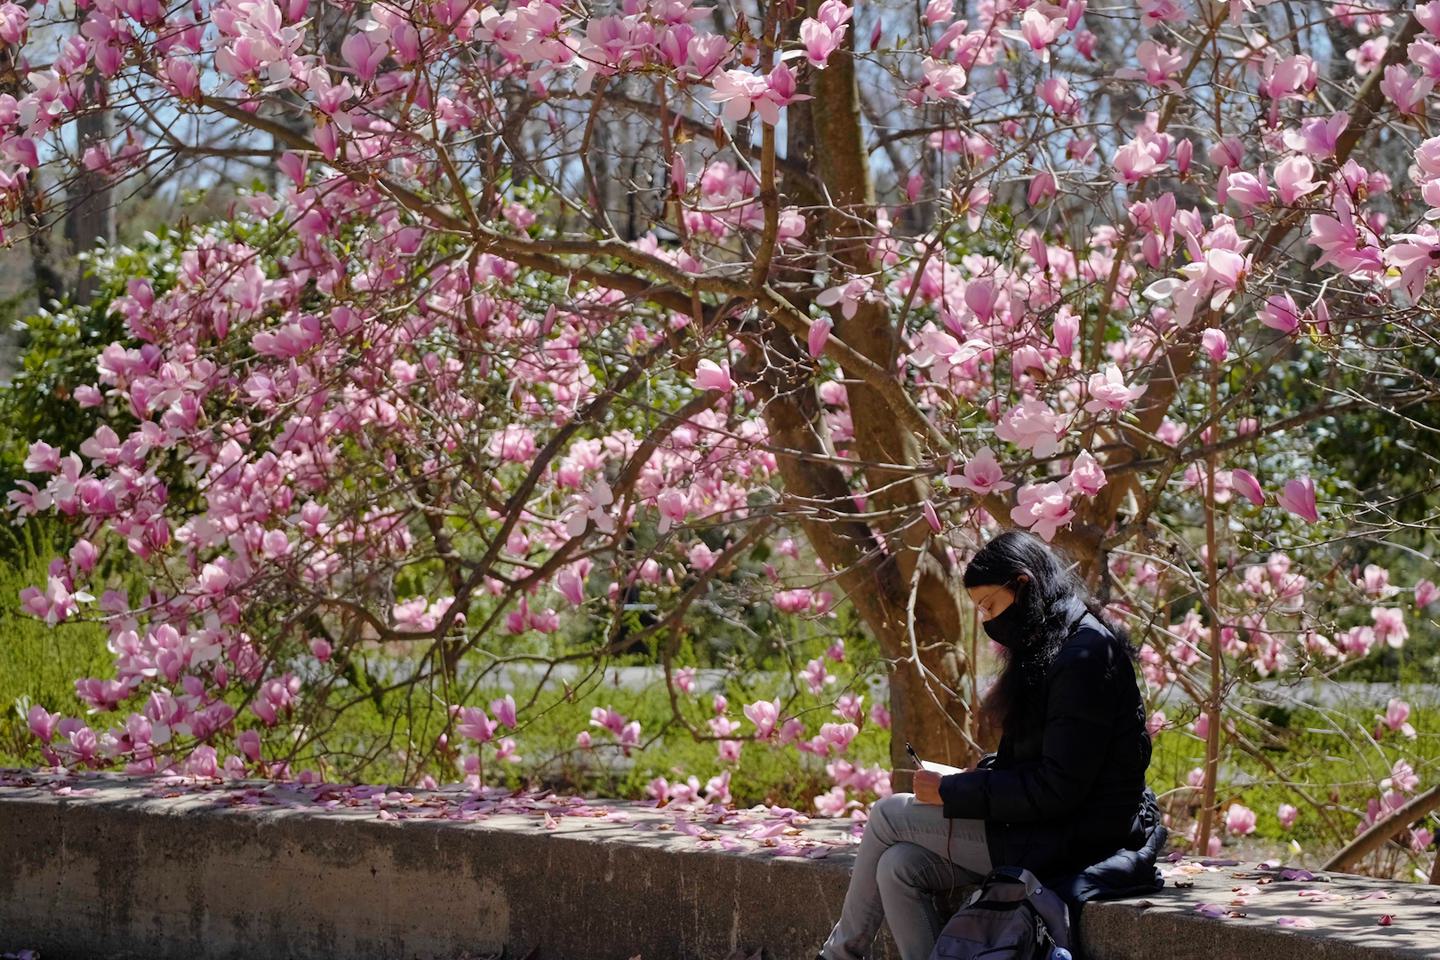 A student sits under a tree with pink flowers and writes in her notebook.